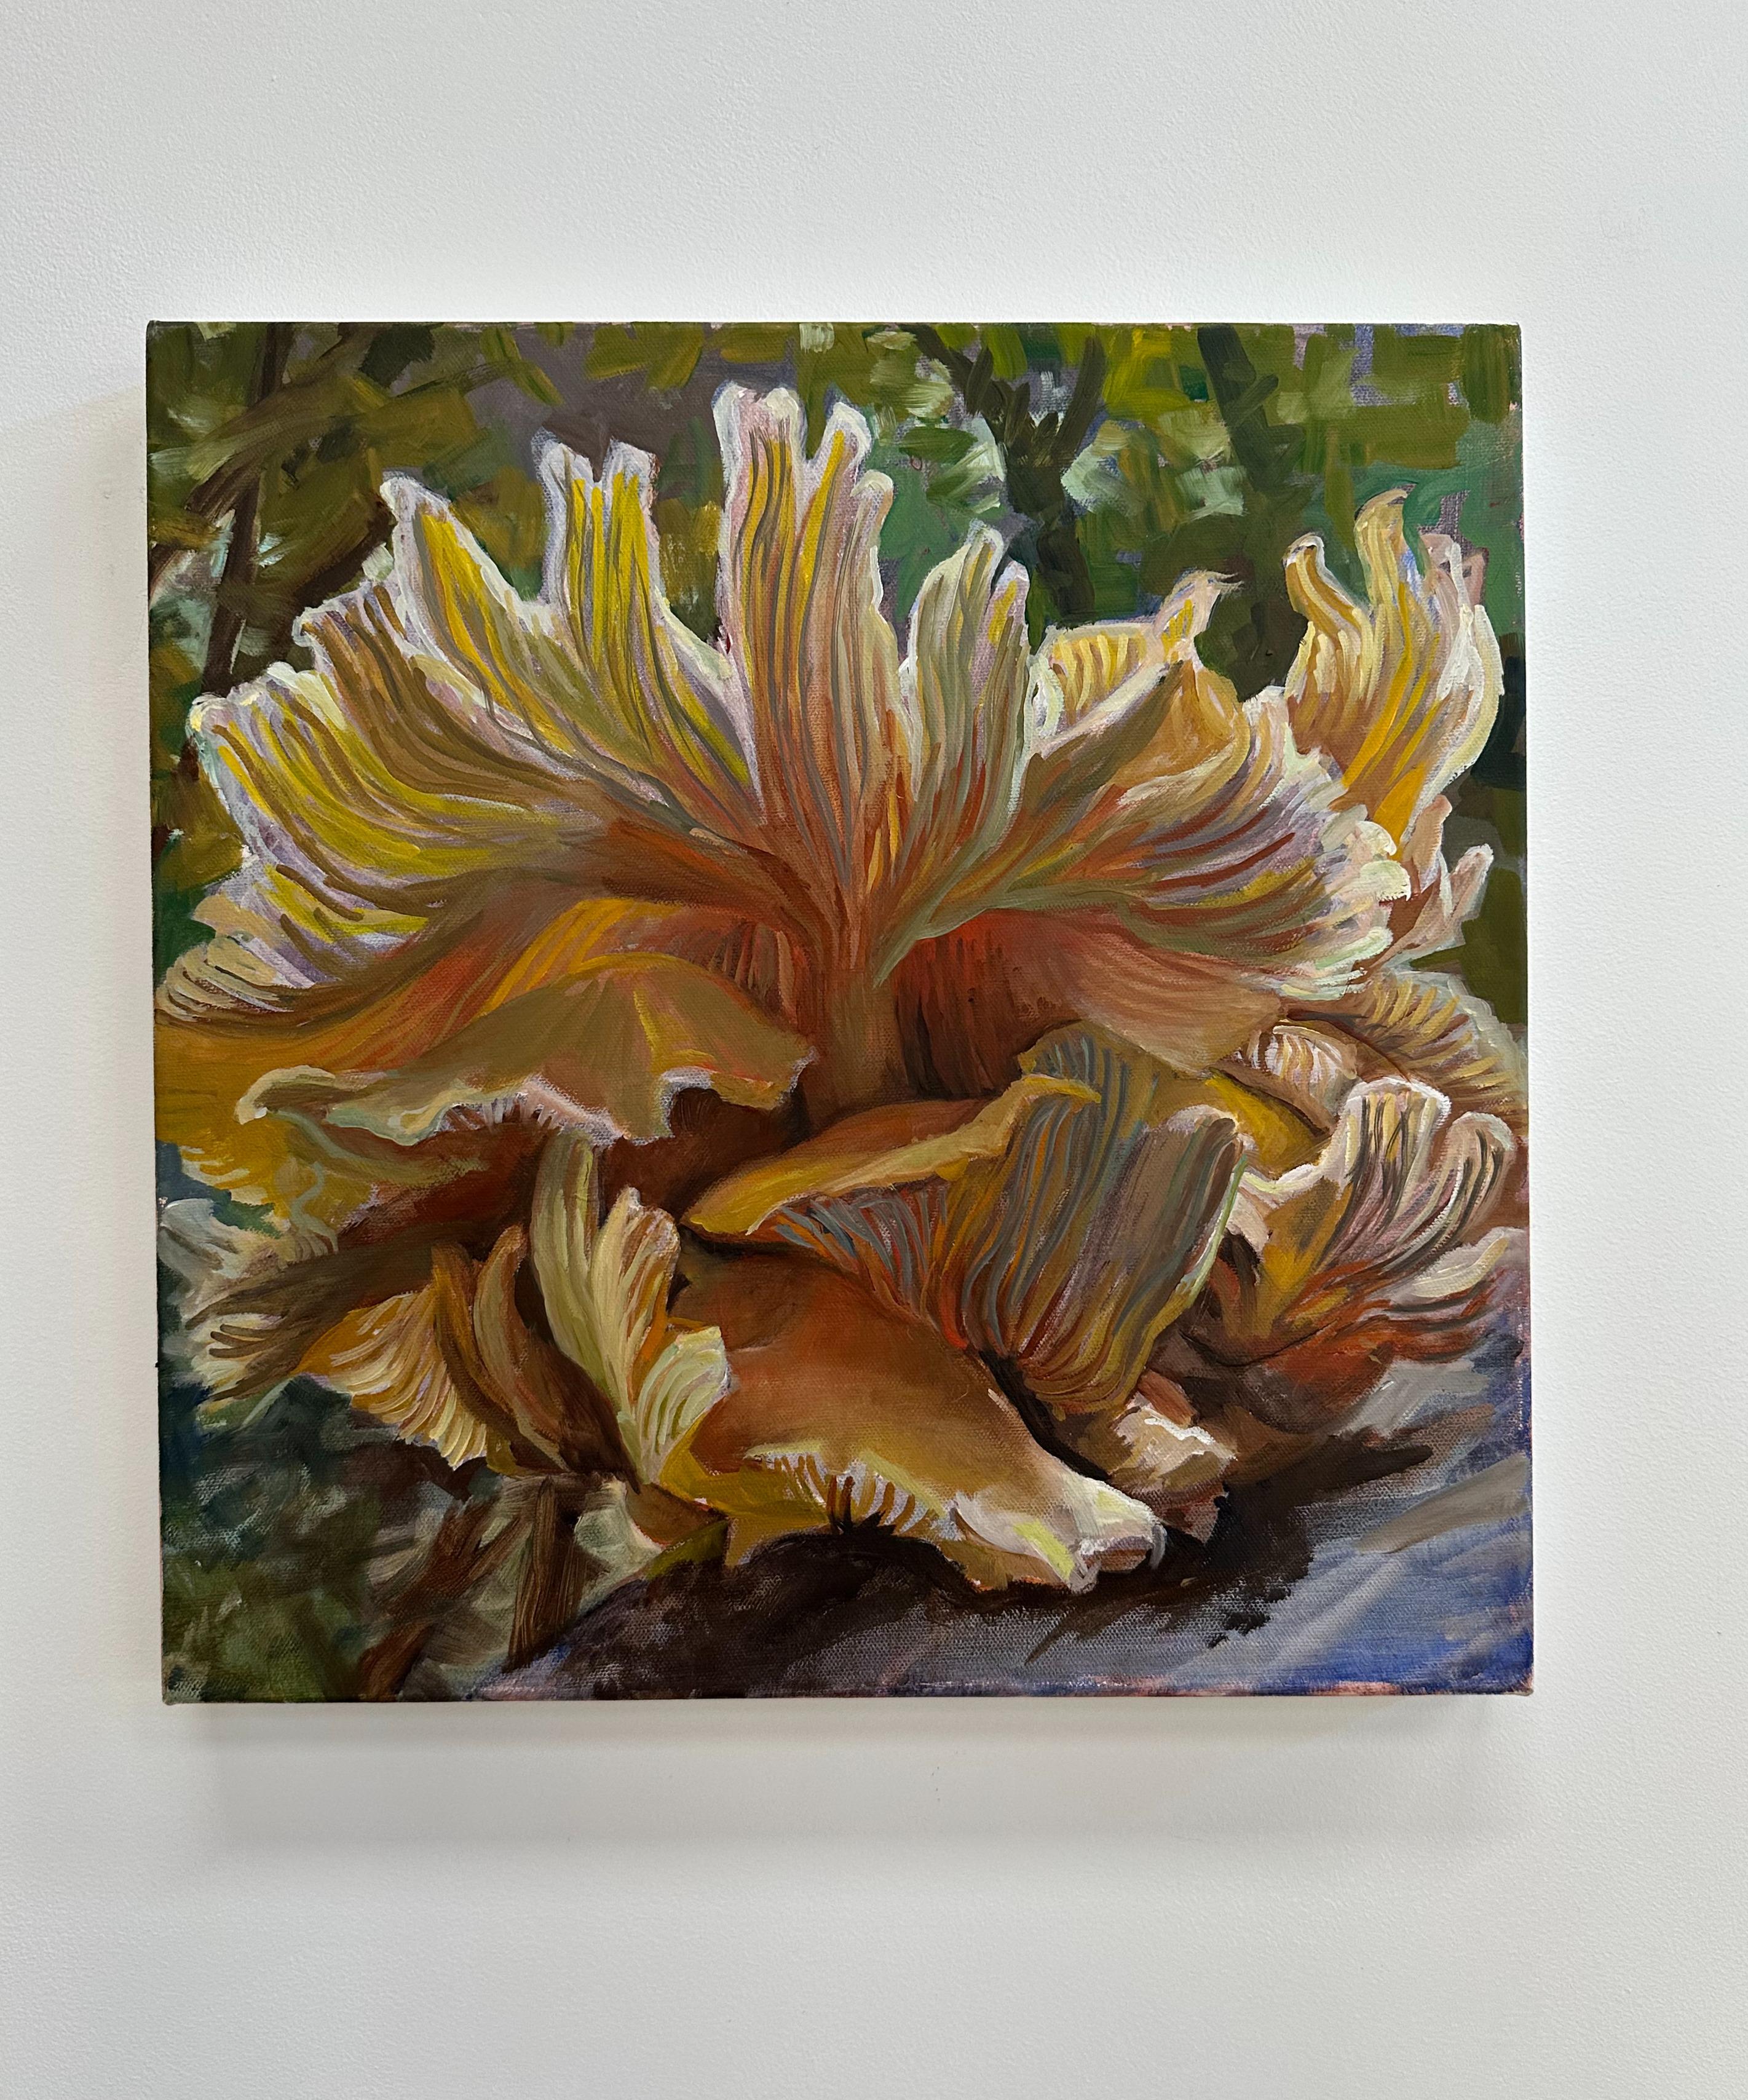 Study for Golden Oysters One, Mushroom Still Life, Yellow, Peach, Moss Green - Painting by Andrea Kantrowitz